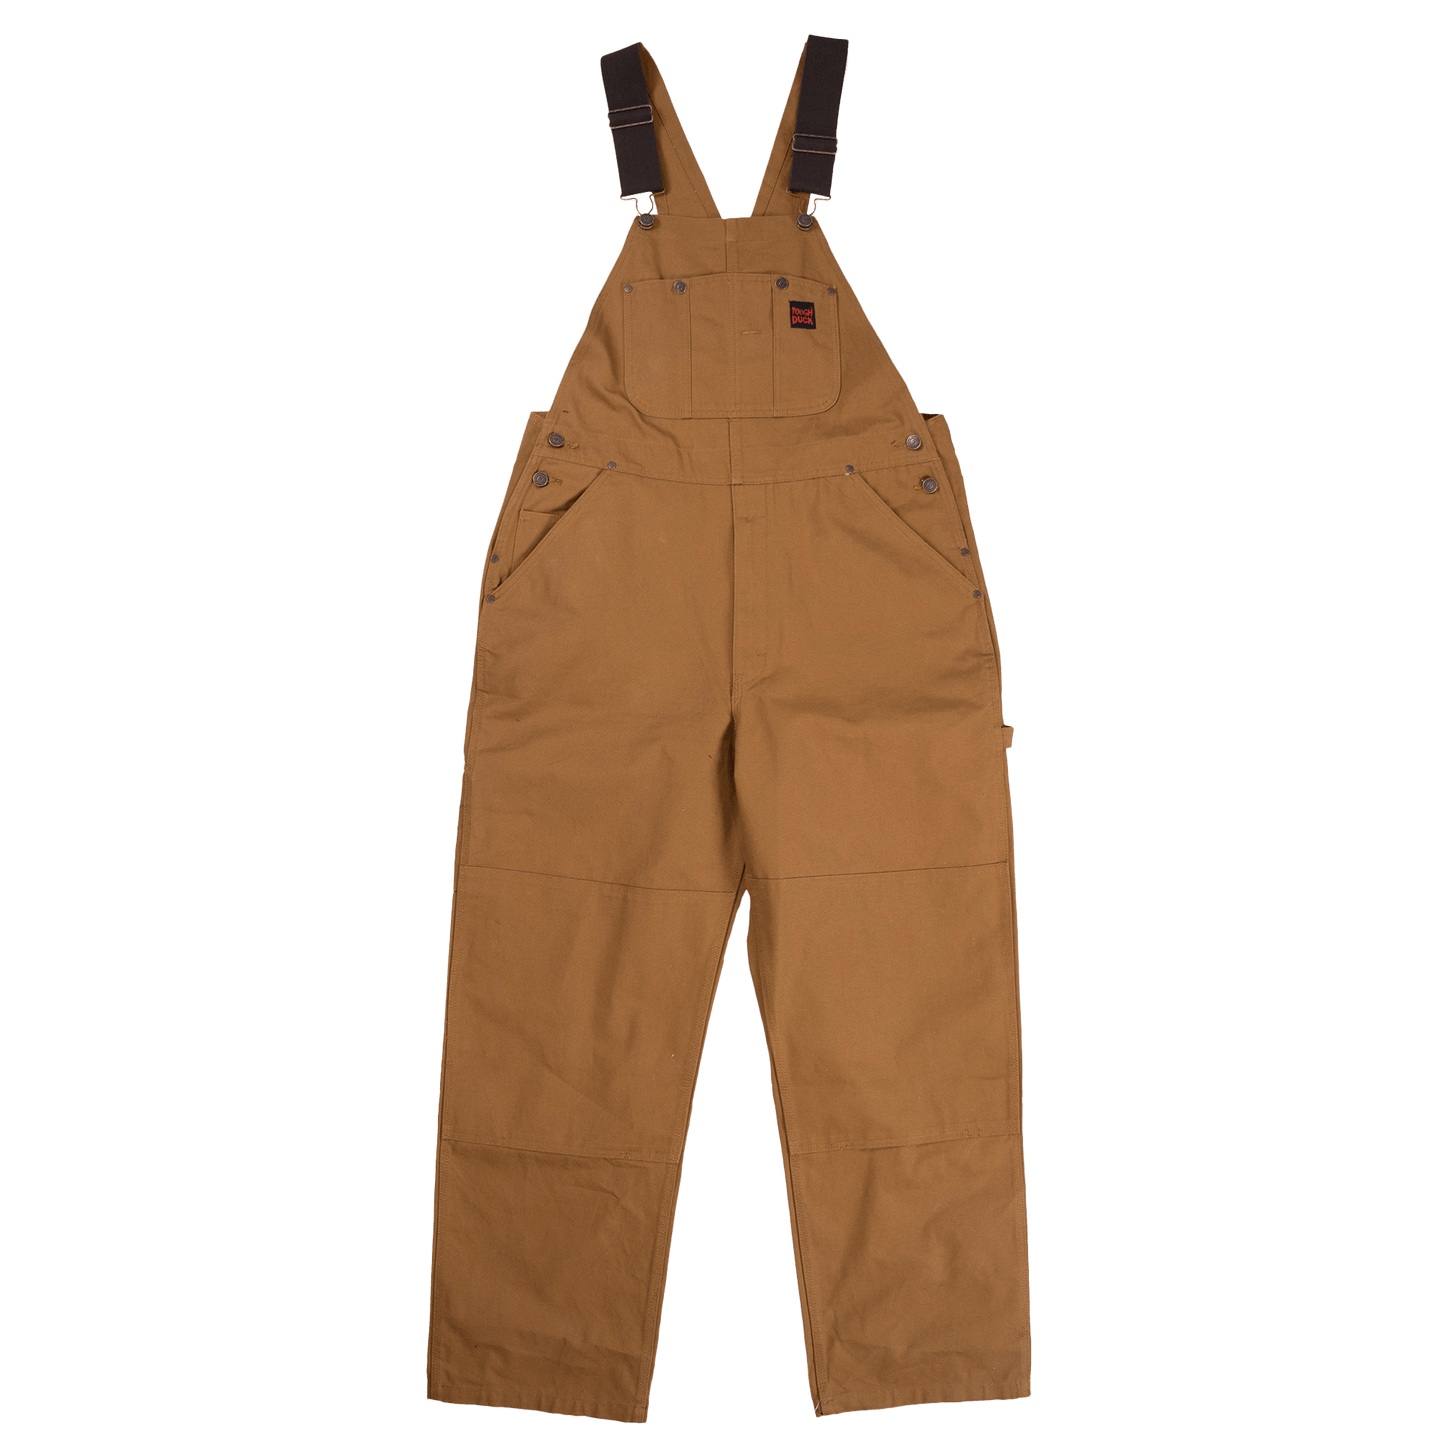 Tough Duck, Unlined Bib Overall i198